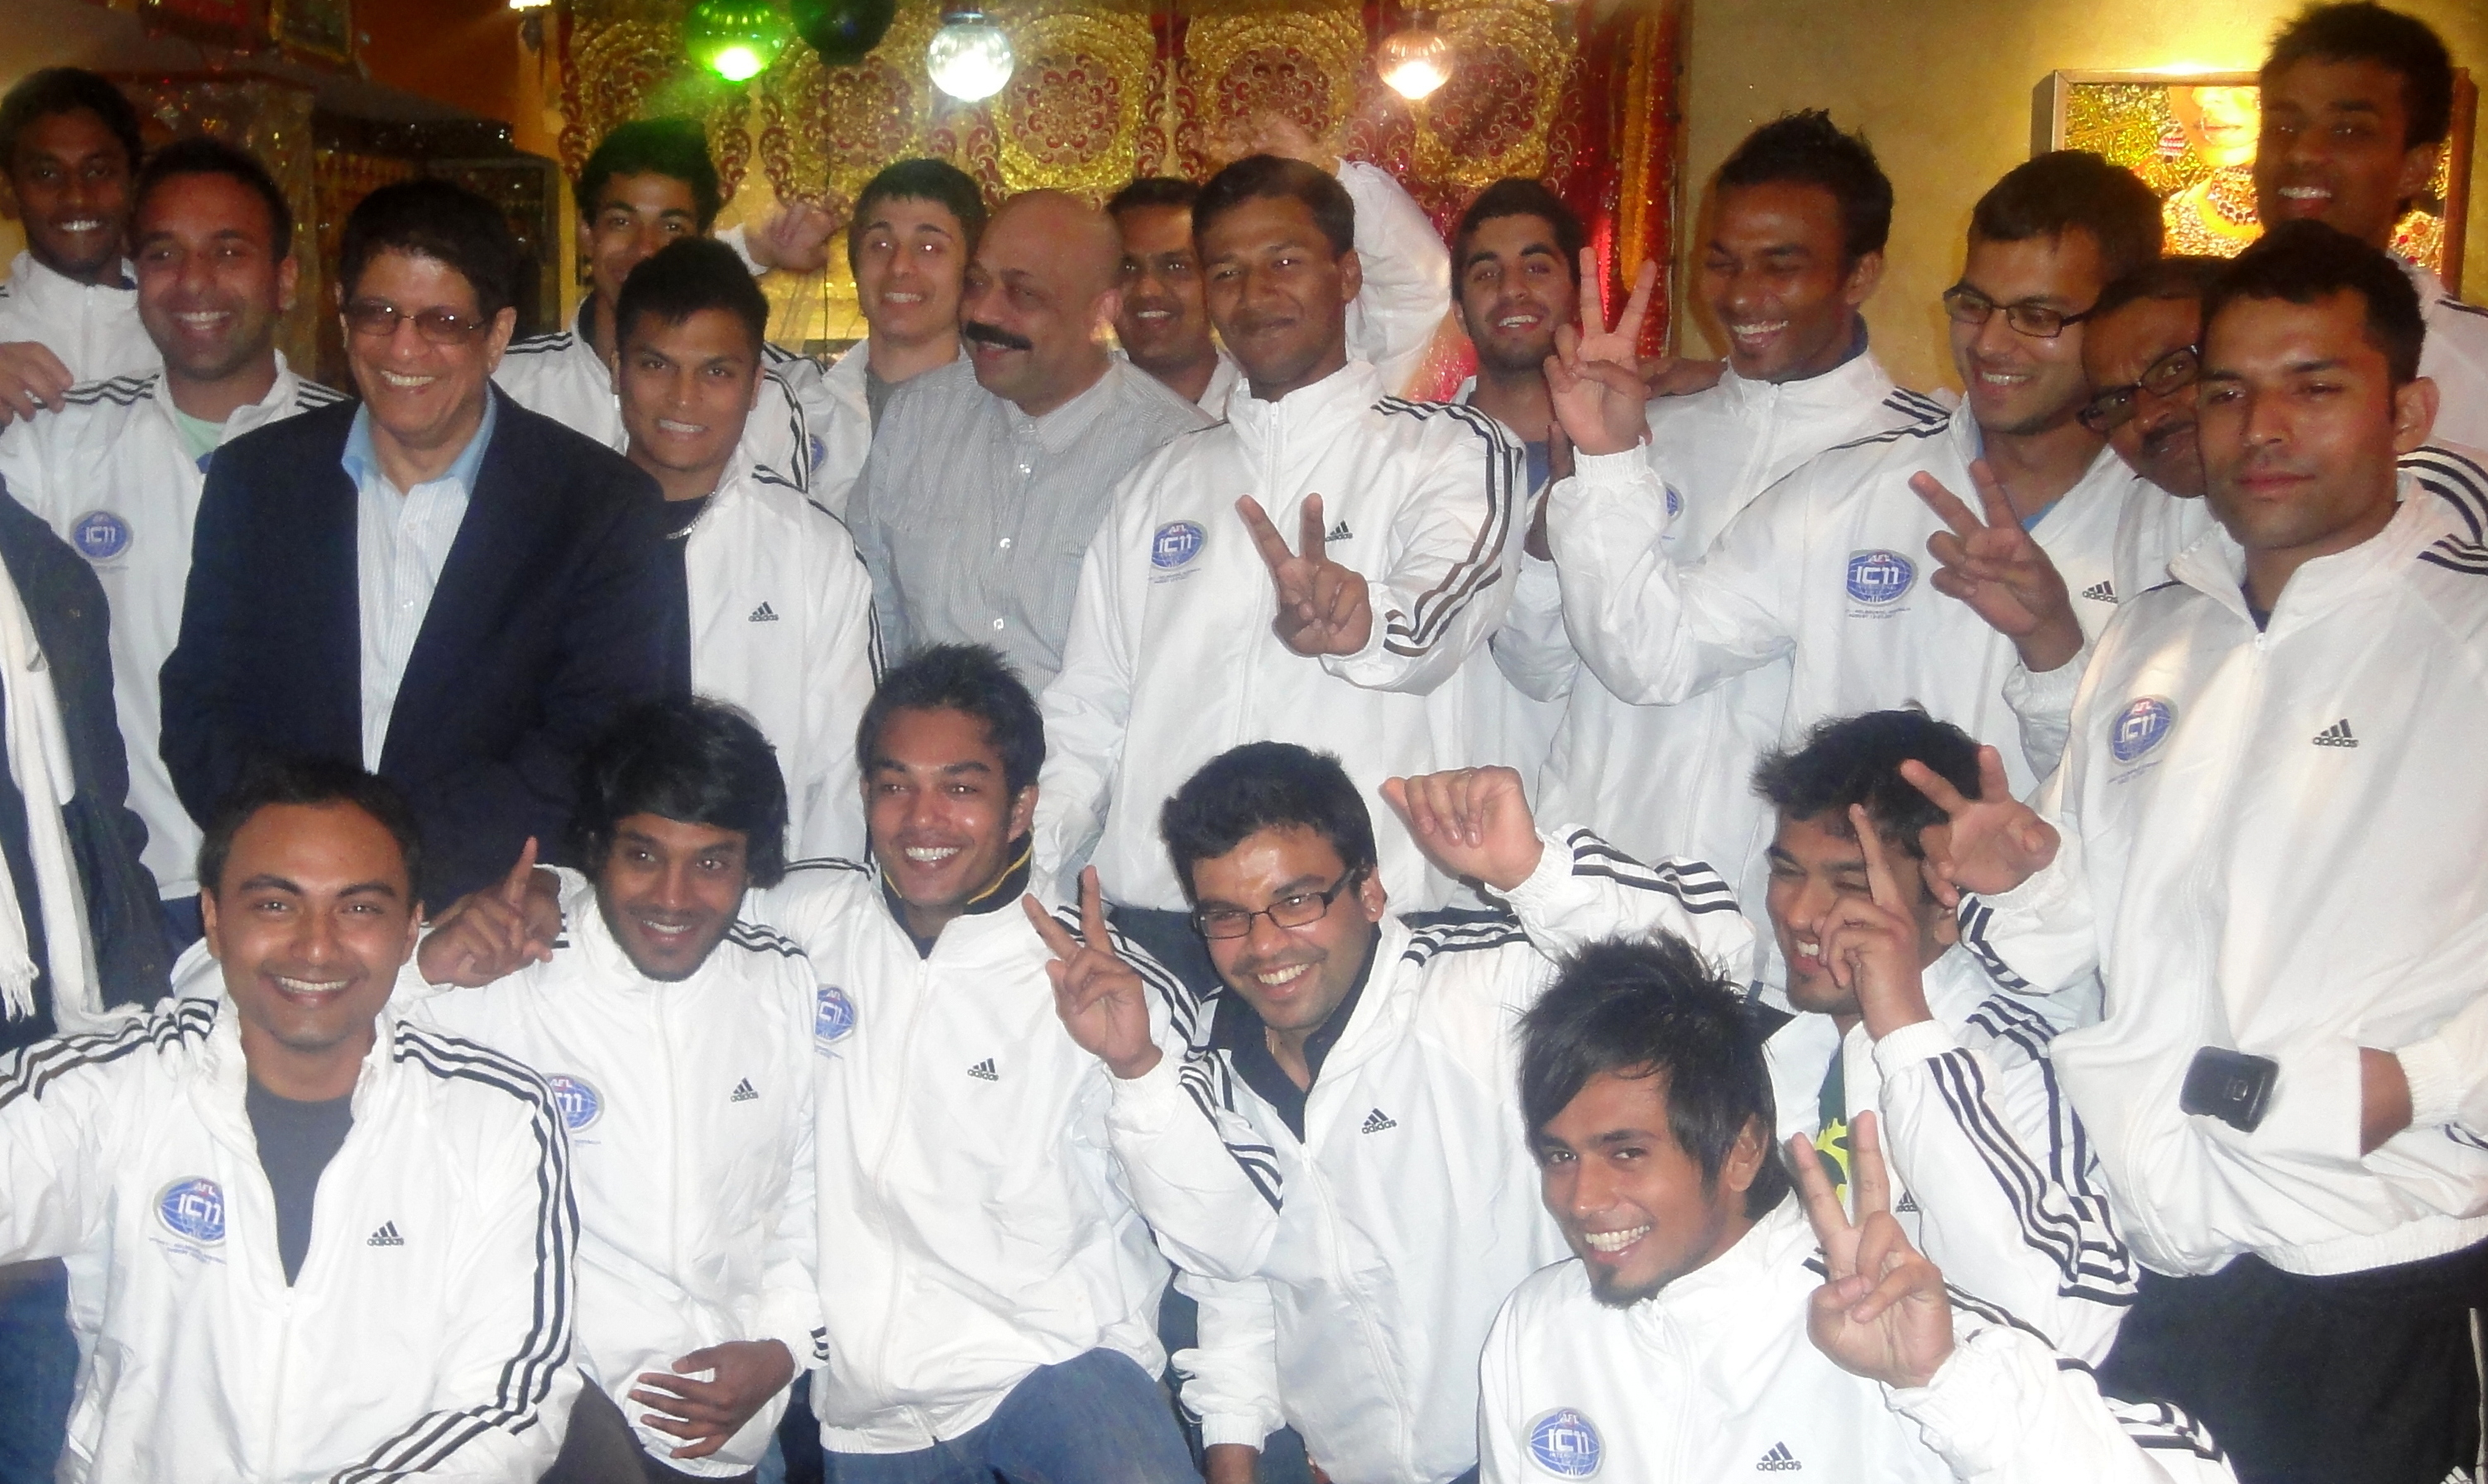 Mr. Watts with the Indian team in 2011 at a dinner hosted by Bhavan's Australia